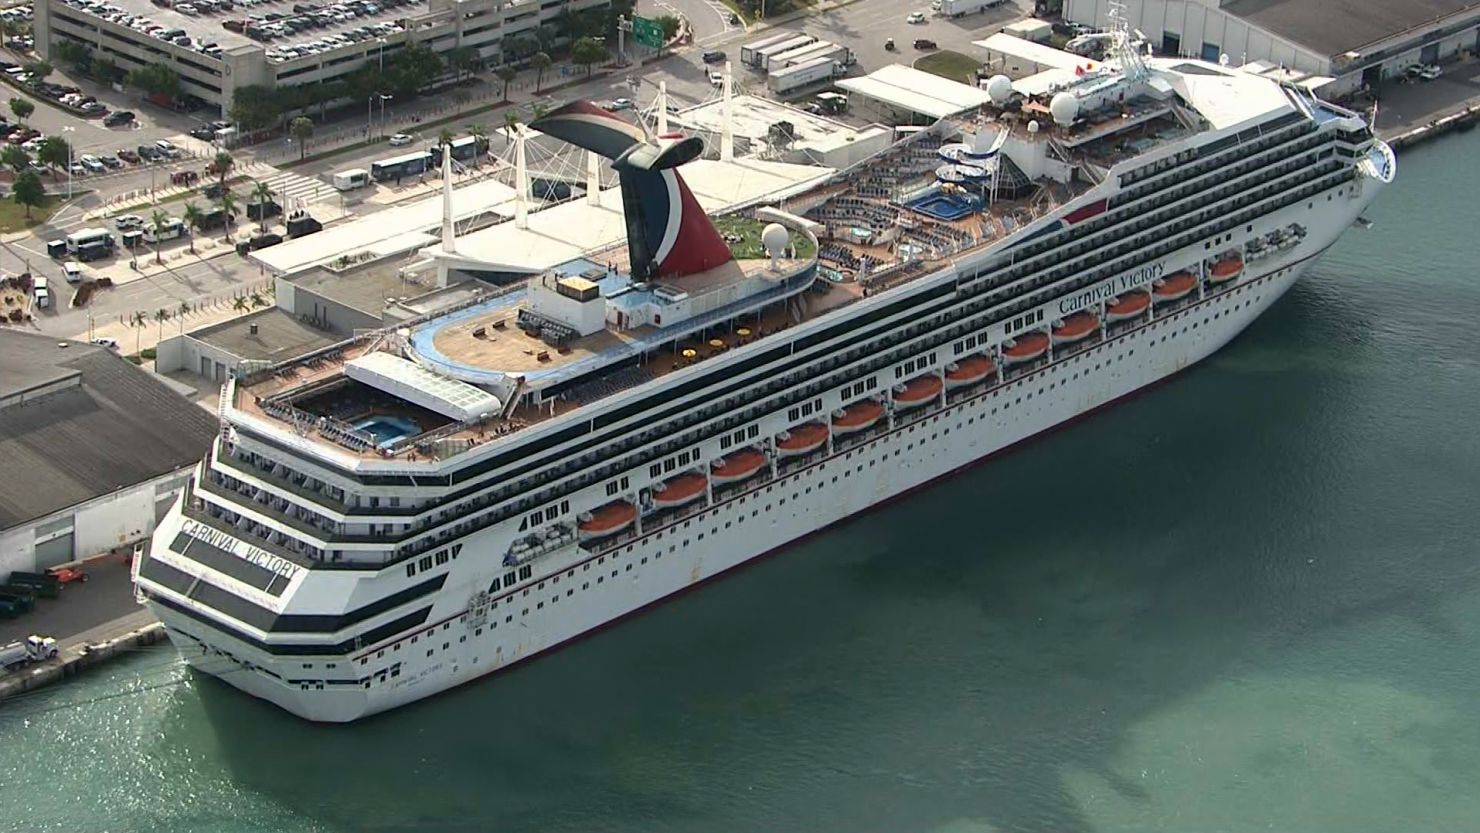 The Carnival Victory arrives at Miami after a four-day voyage.